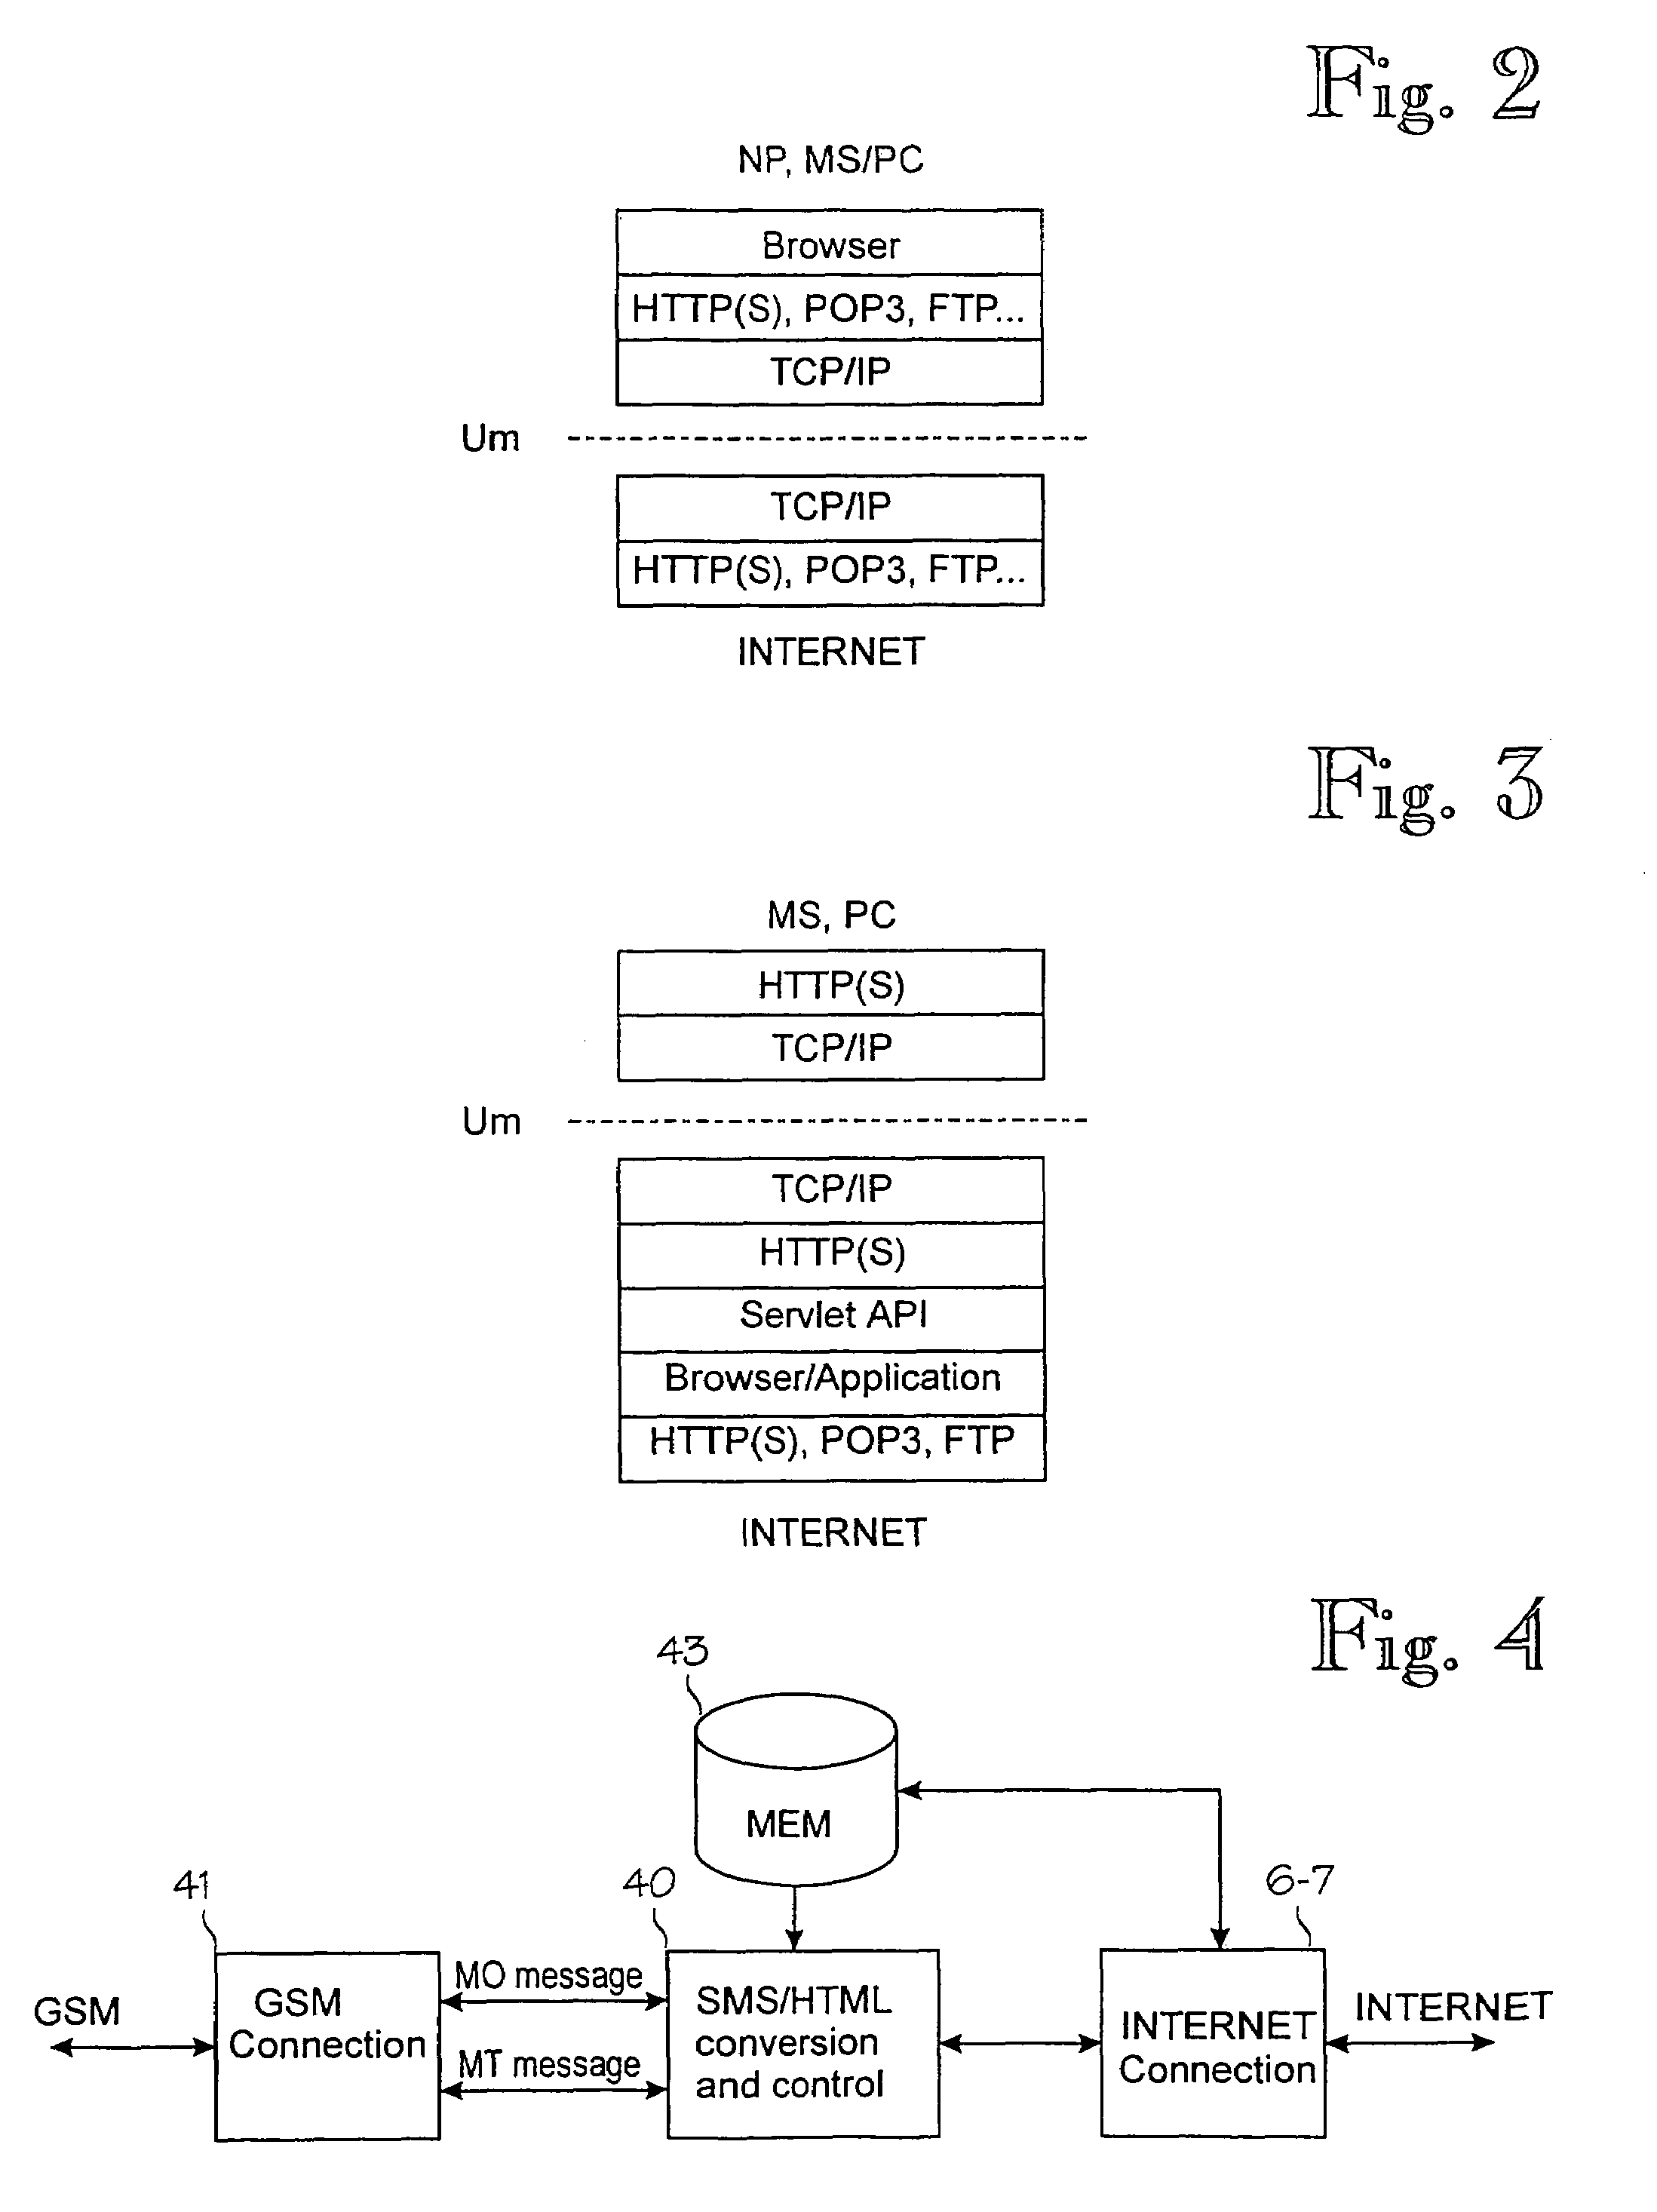 Data service in a mobile communications network